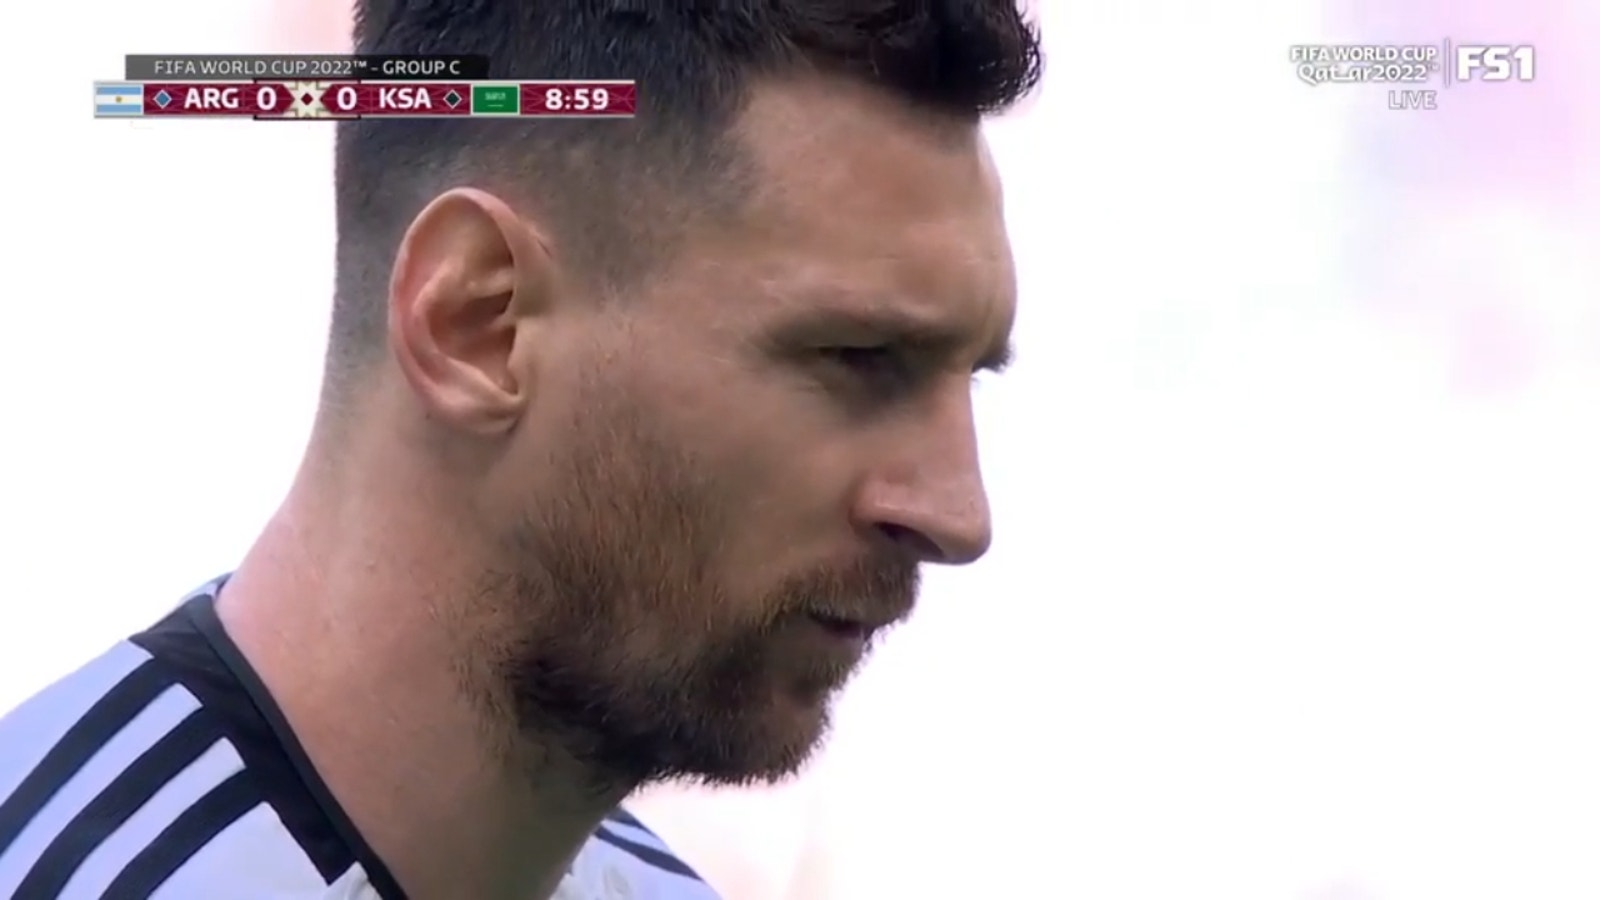 Lionel Messi scores a PK in the 10th minute to give Argentina a 1-0 lead over Saudi Arabia.